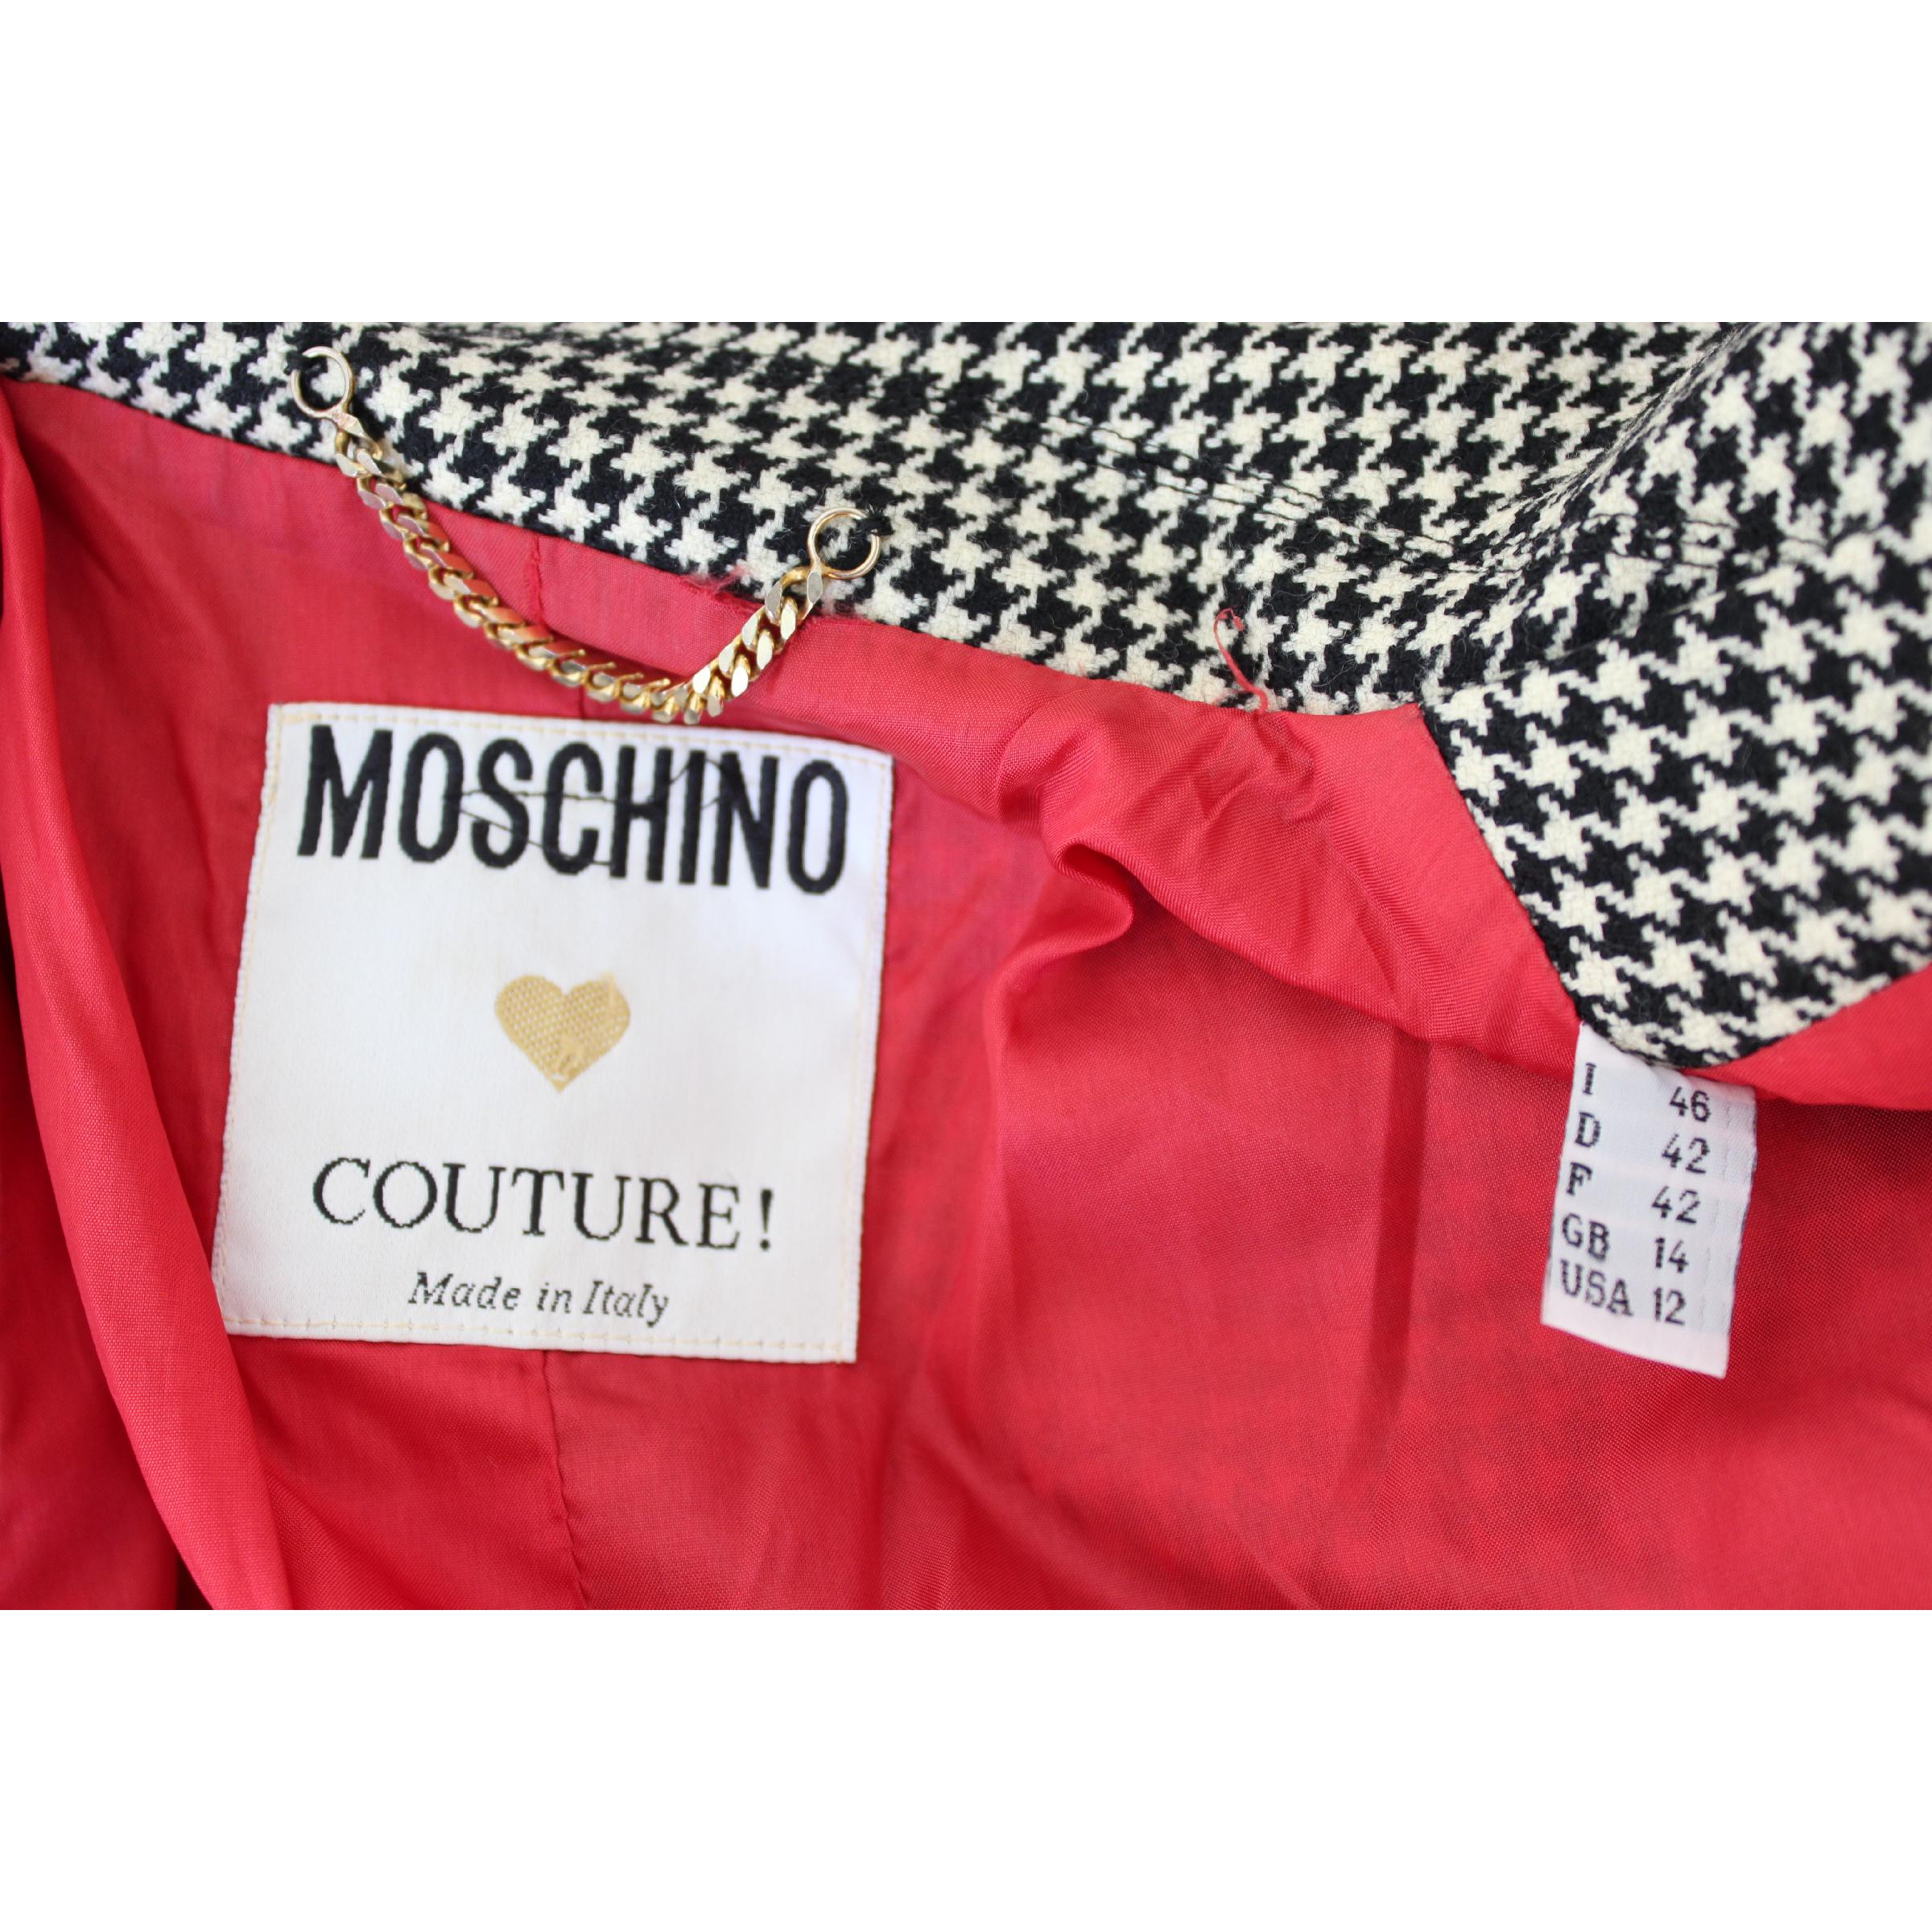 1990s Moschino Black and White Pied de Poule Houndstooth Wool Jacket 2